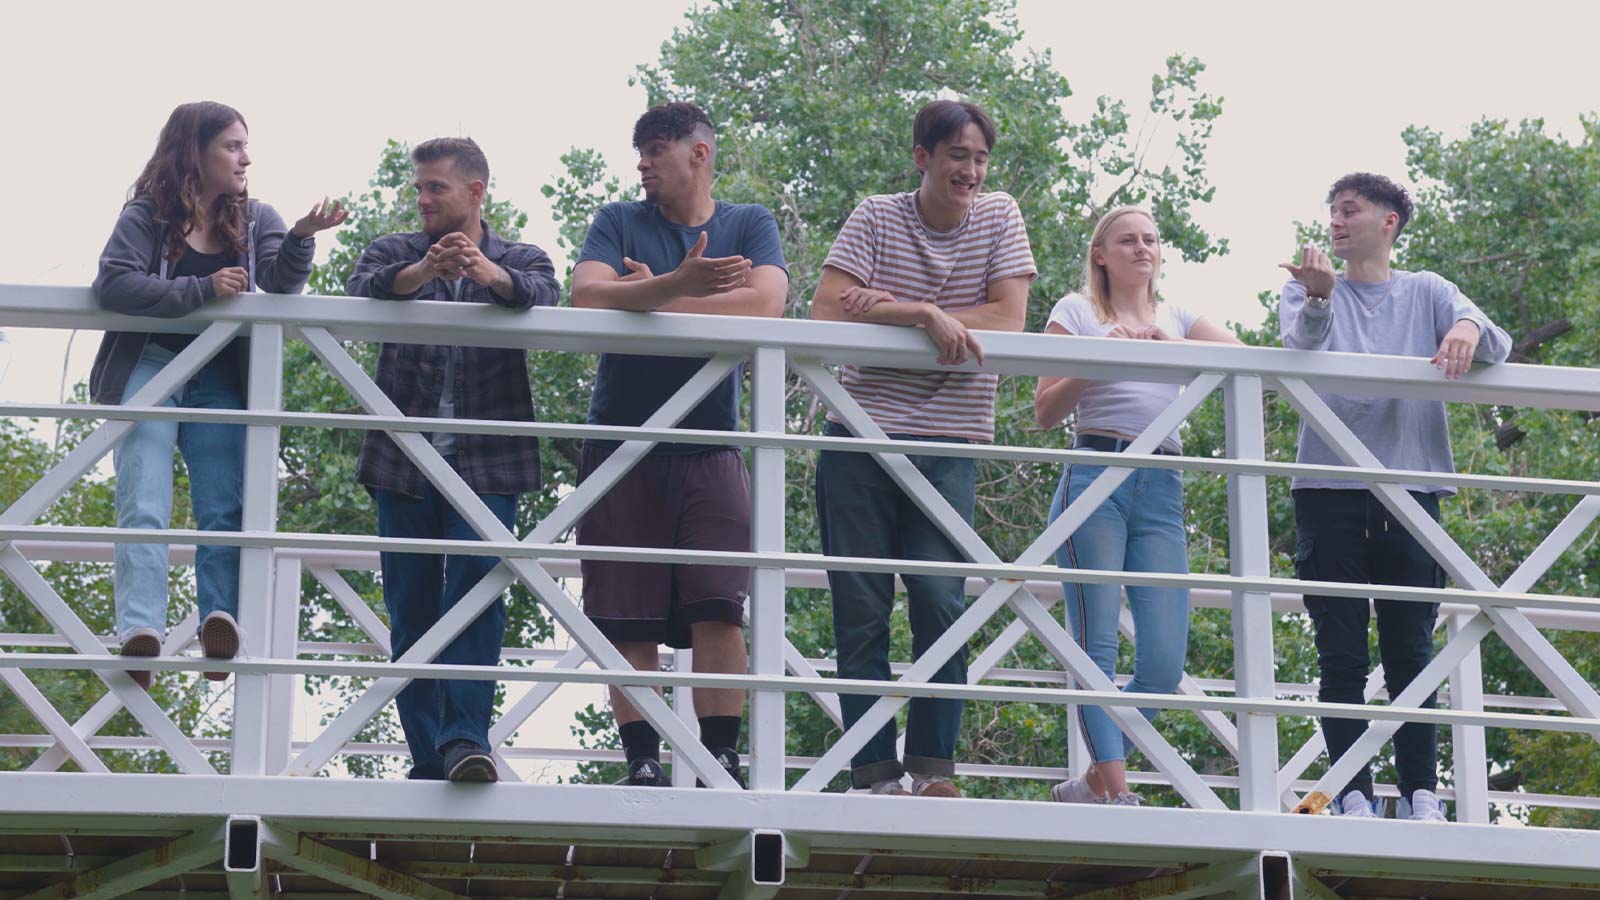 A casual meeting on a bridge outdoors, with a group of young adults engaged in conversation.